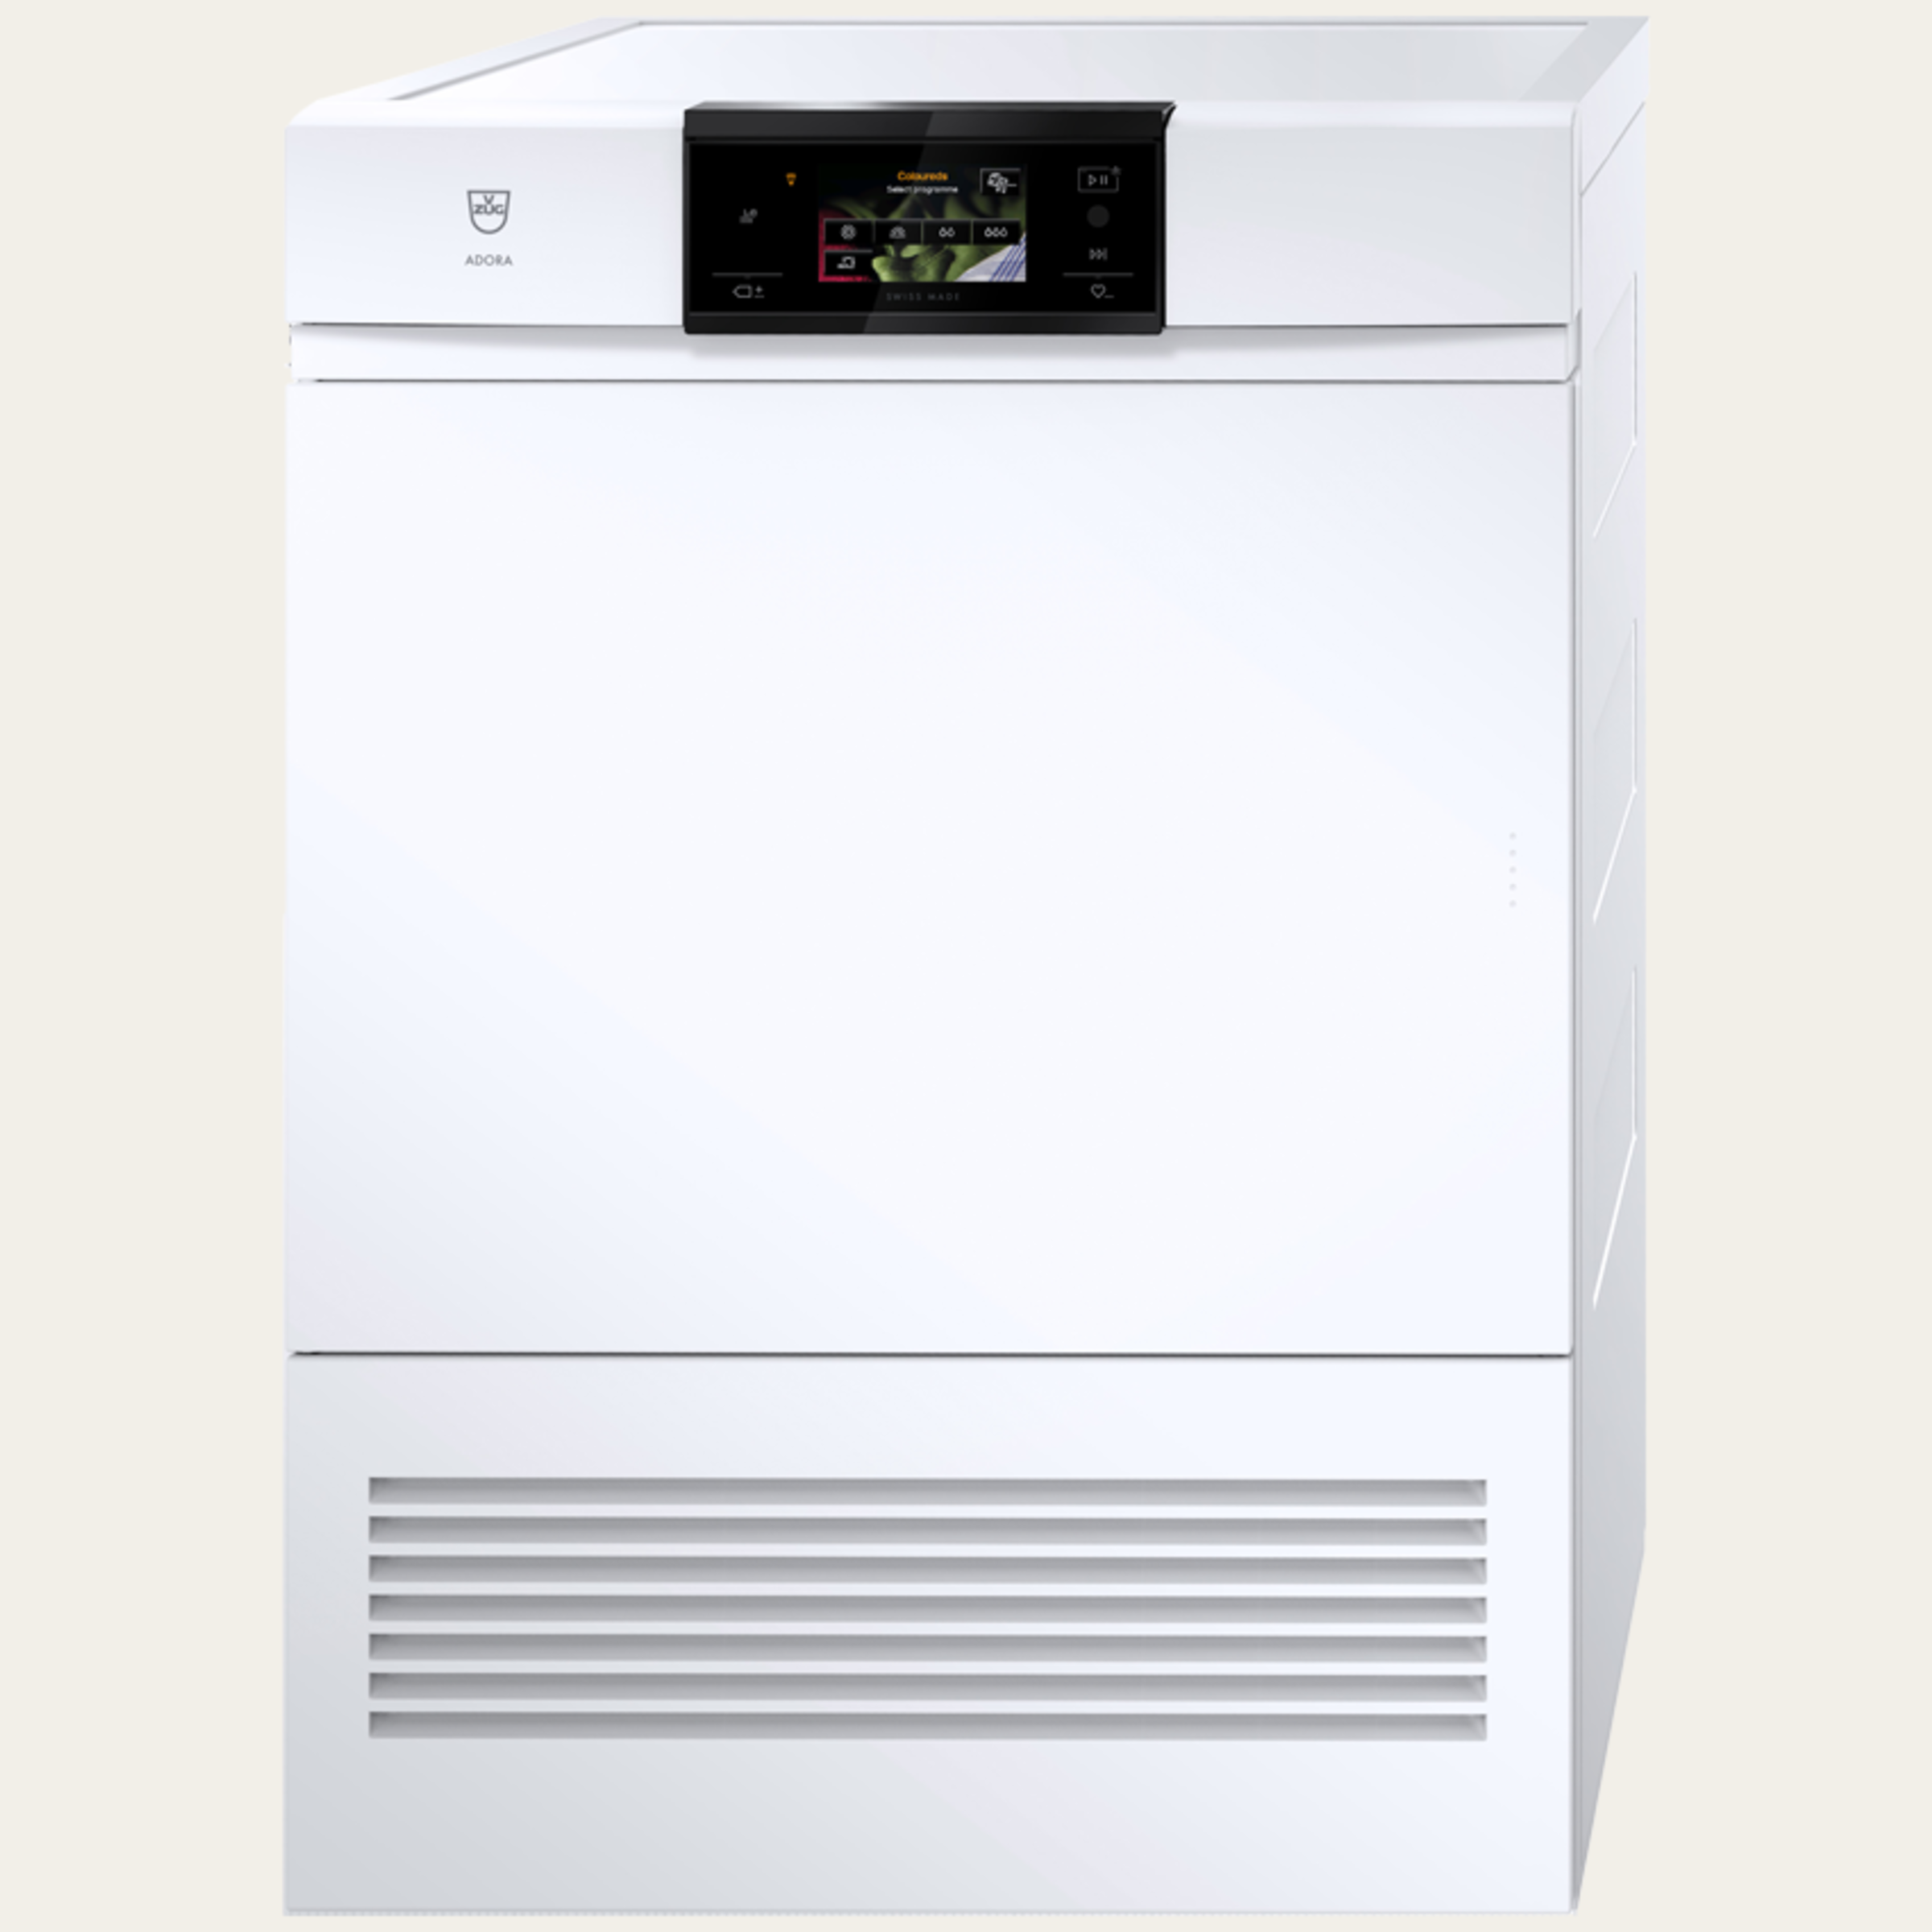 V-ZUG Tumble dryer AdoraDry V2000, Door hinge: Right, V-ZUG-Home, Nominal capacity: 7 kg, Full-colour graphic display, touchscreen, Air transport according toUN 3358 prohibited